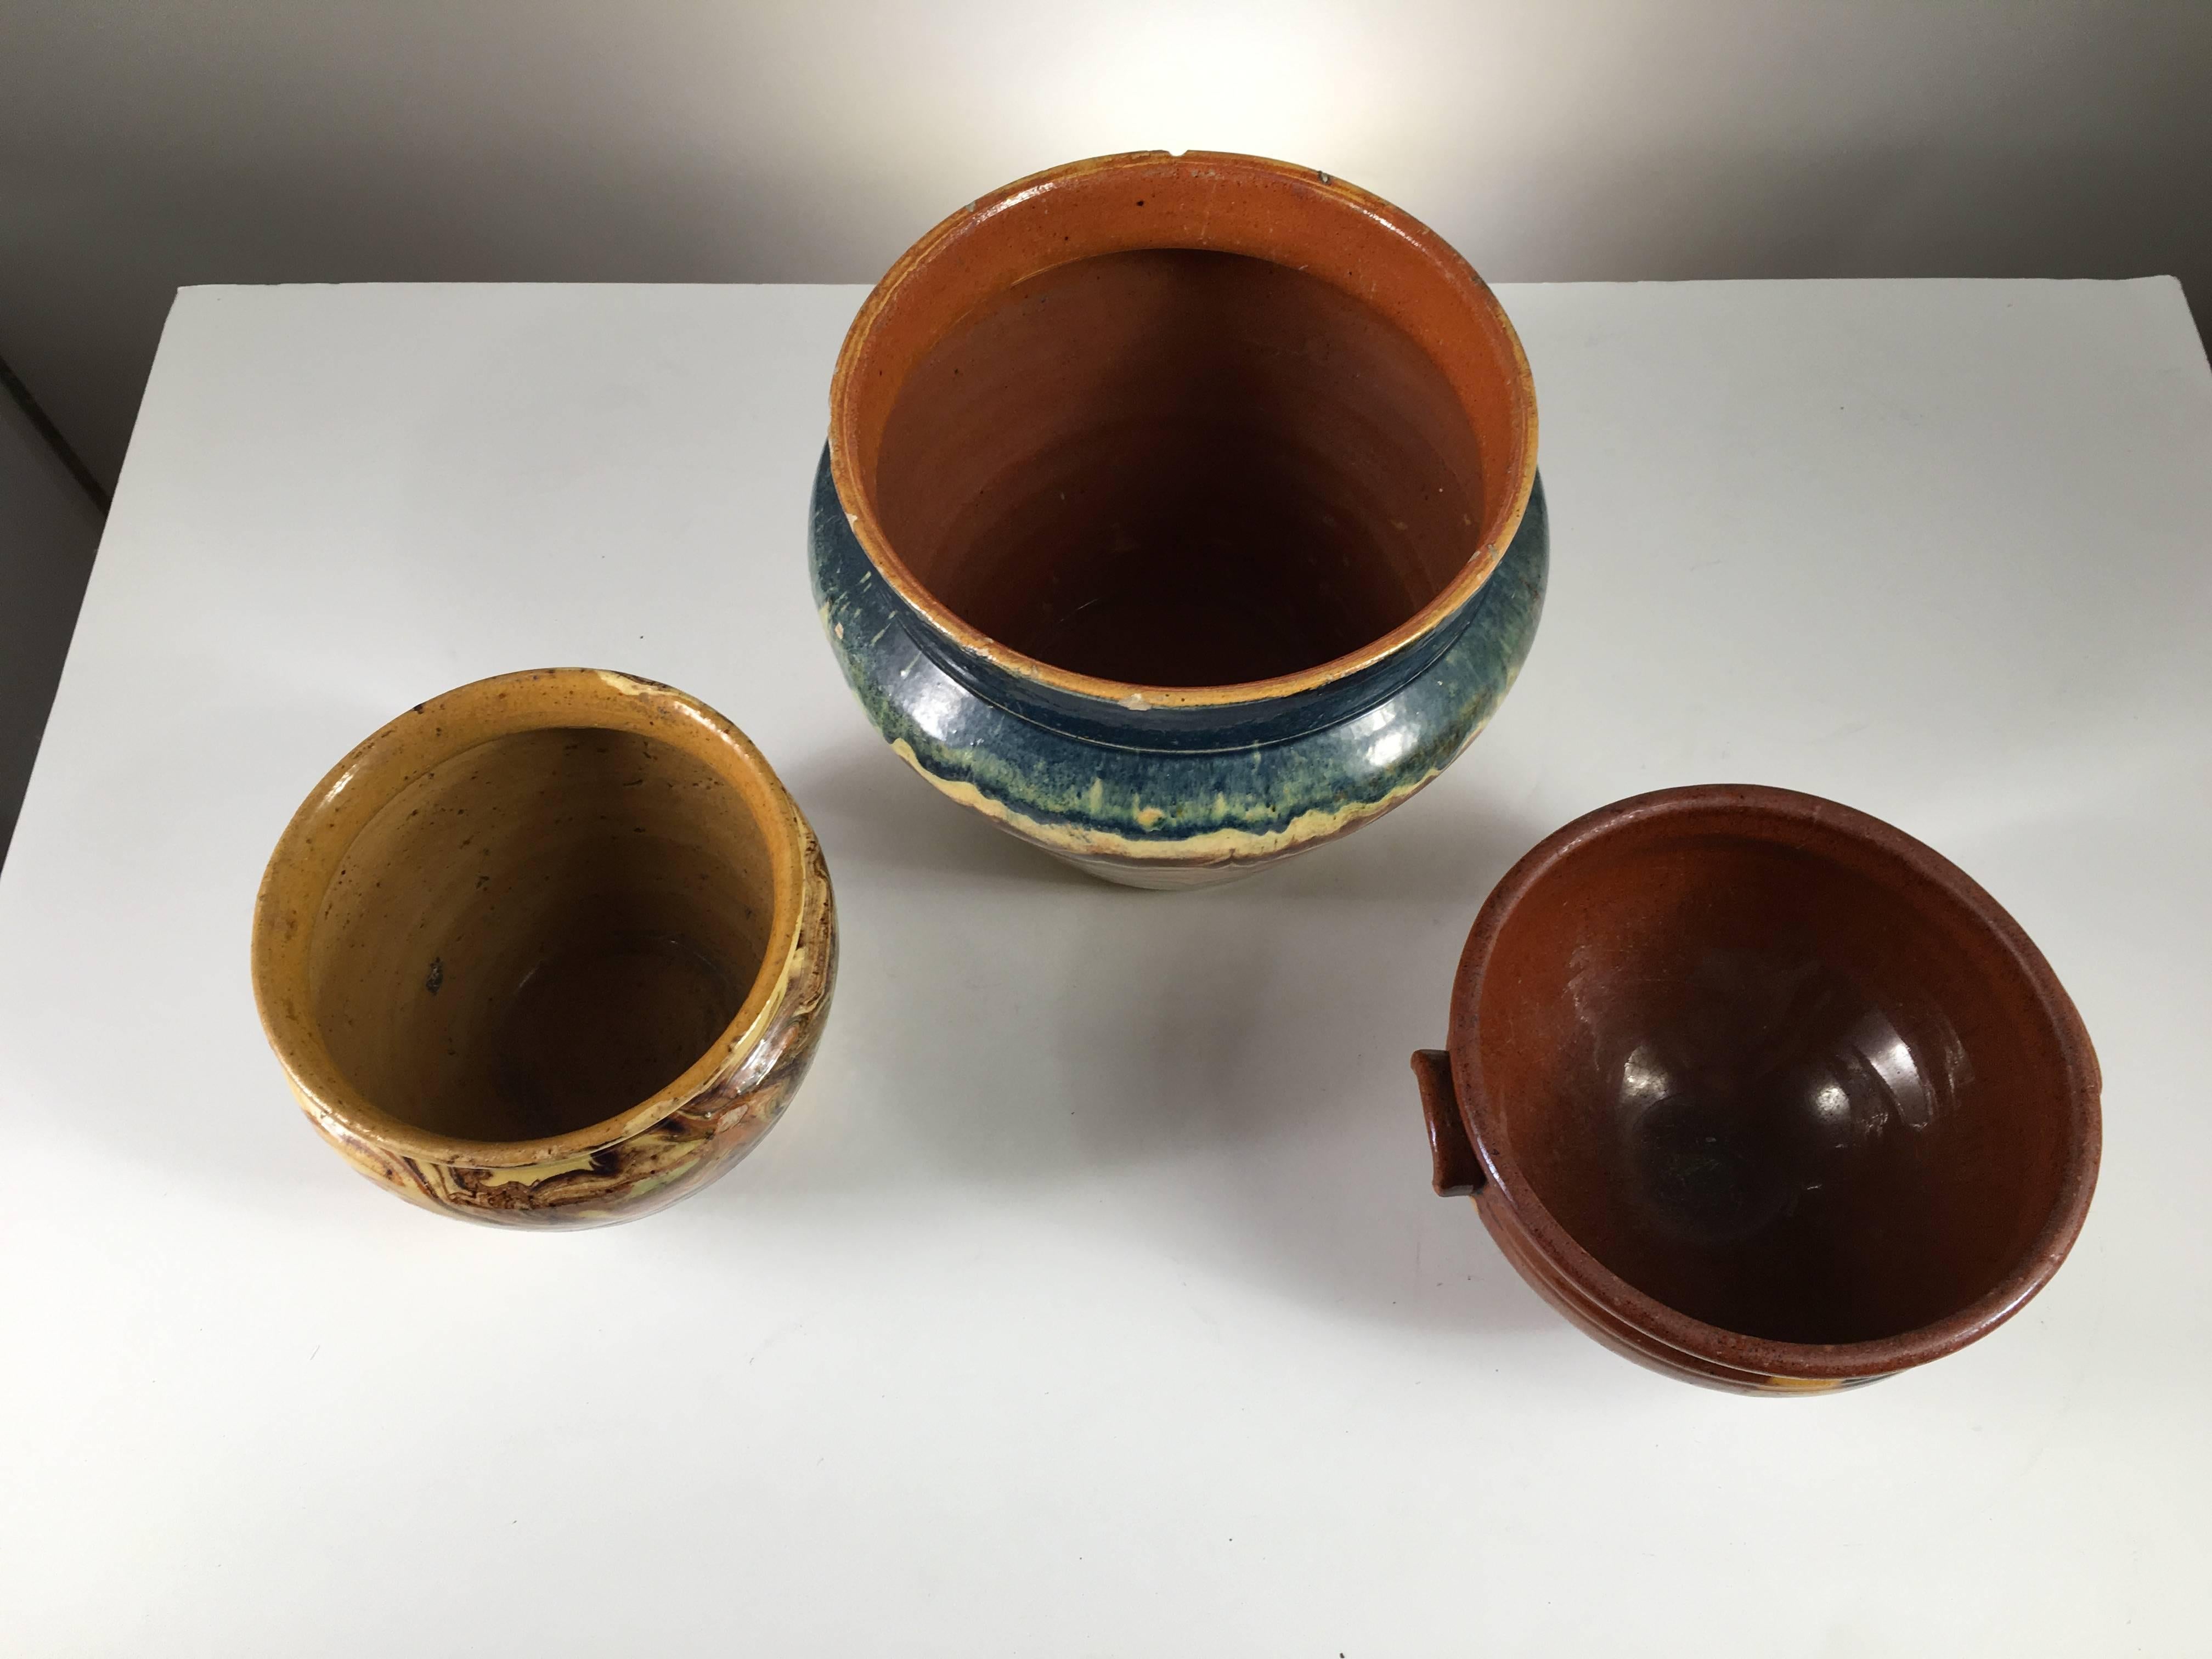 A nice collection of three French provincial Jaspe bowls from the Savoire region, late 19th century, from the collection of Pierre Moulin, author of French Country style books and founder of the Pierre Deux shops.